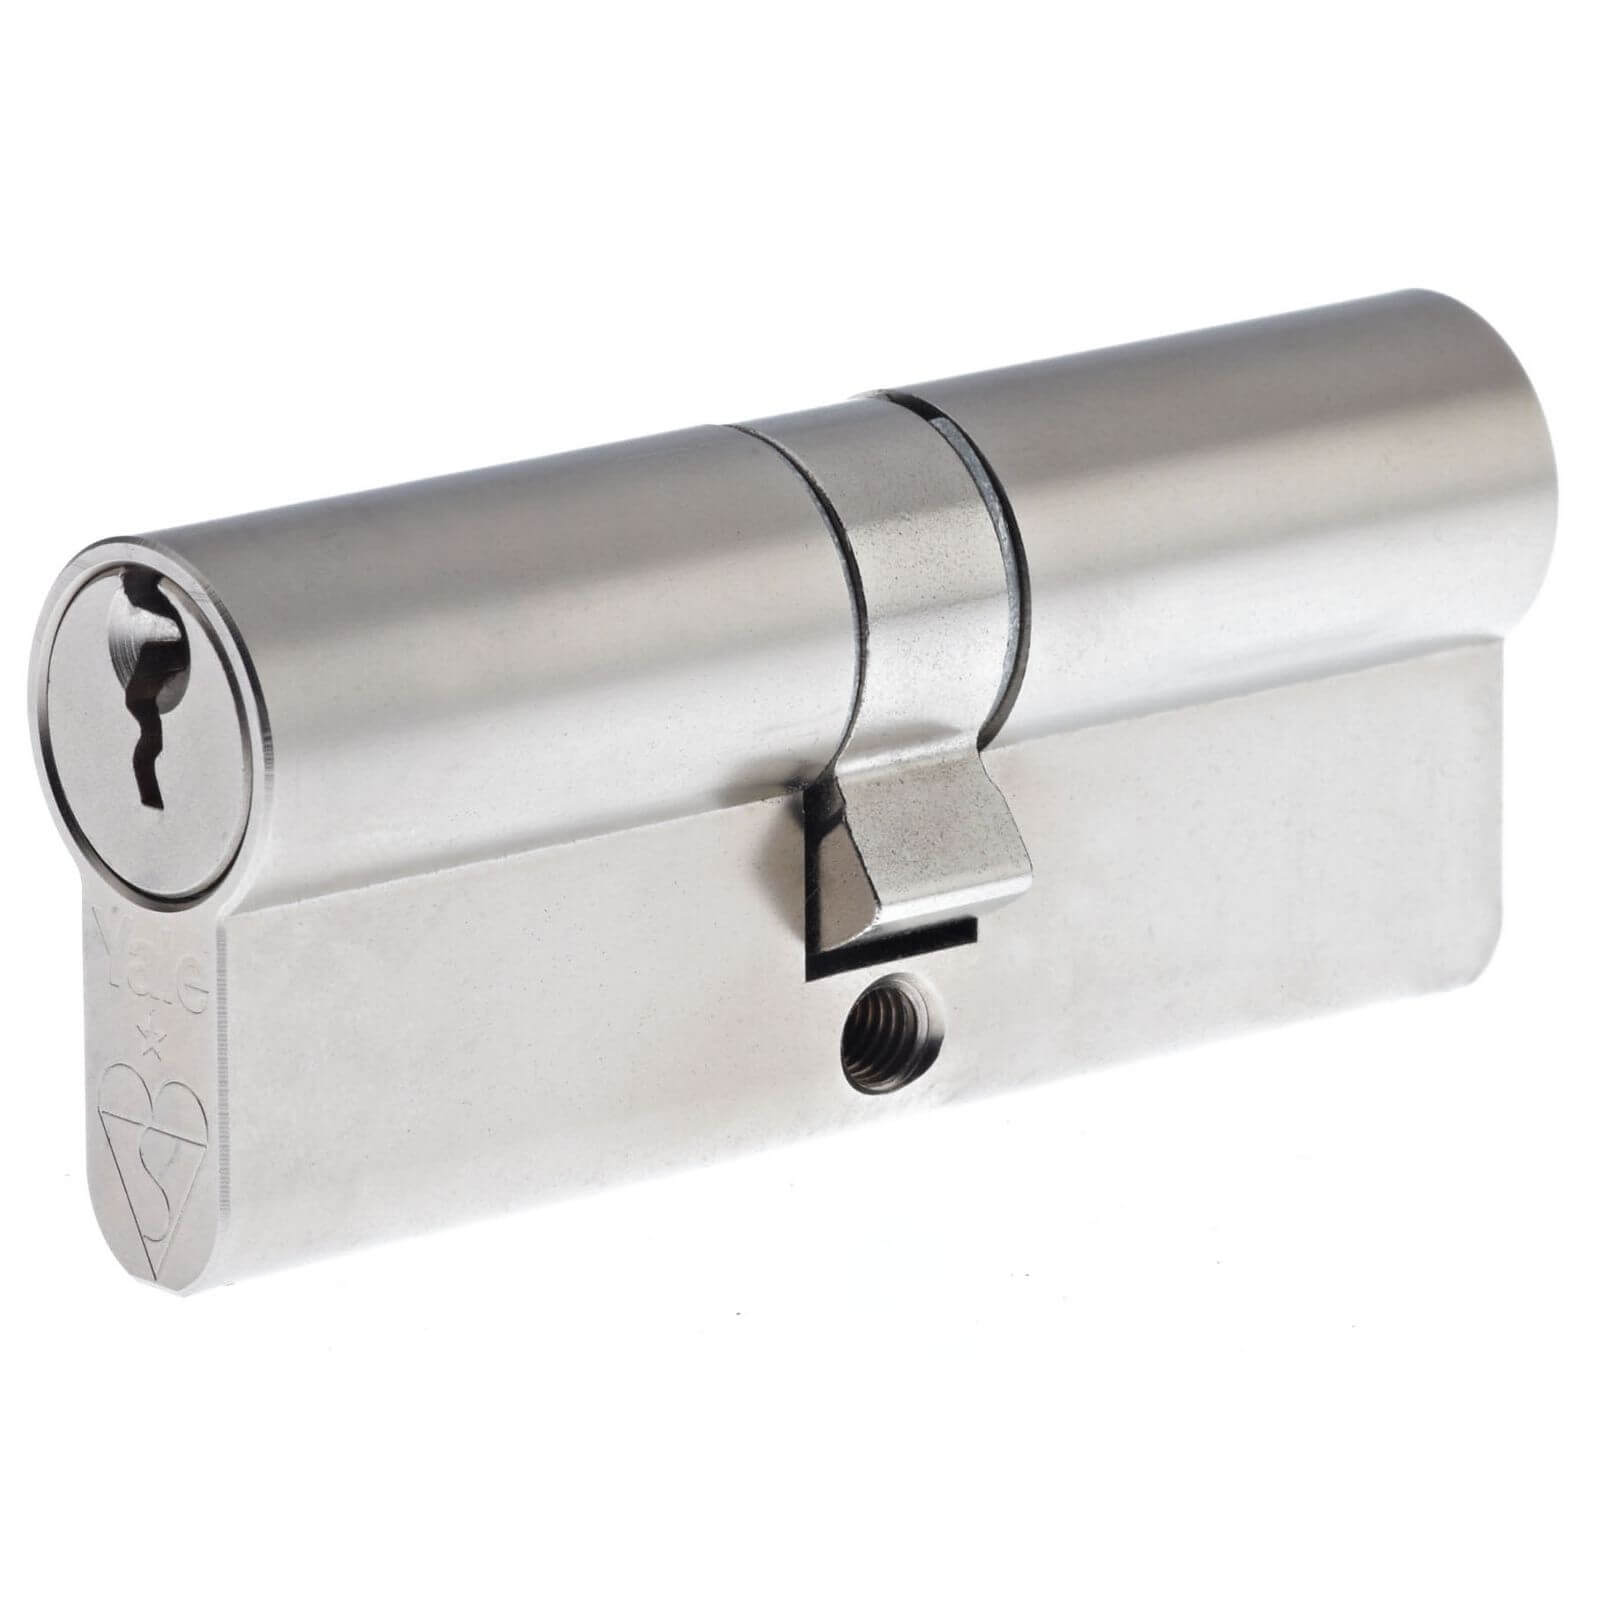 Photo of Yale Kitemarked Euro Double Cylinder - 40:10:50 -100mm- - Nickel Plated